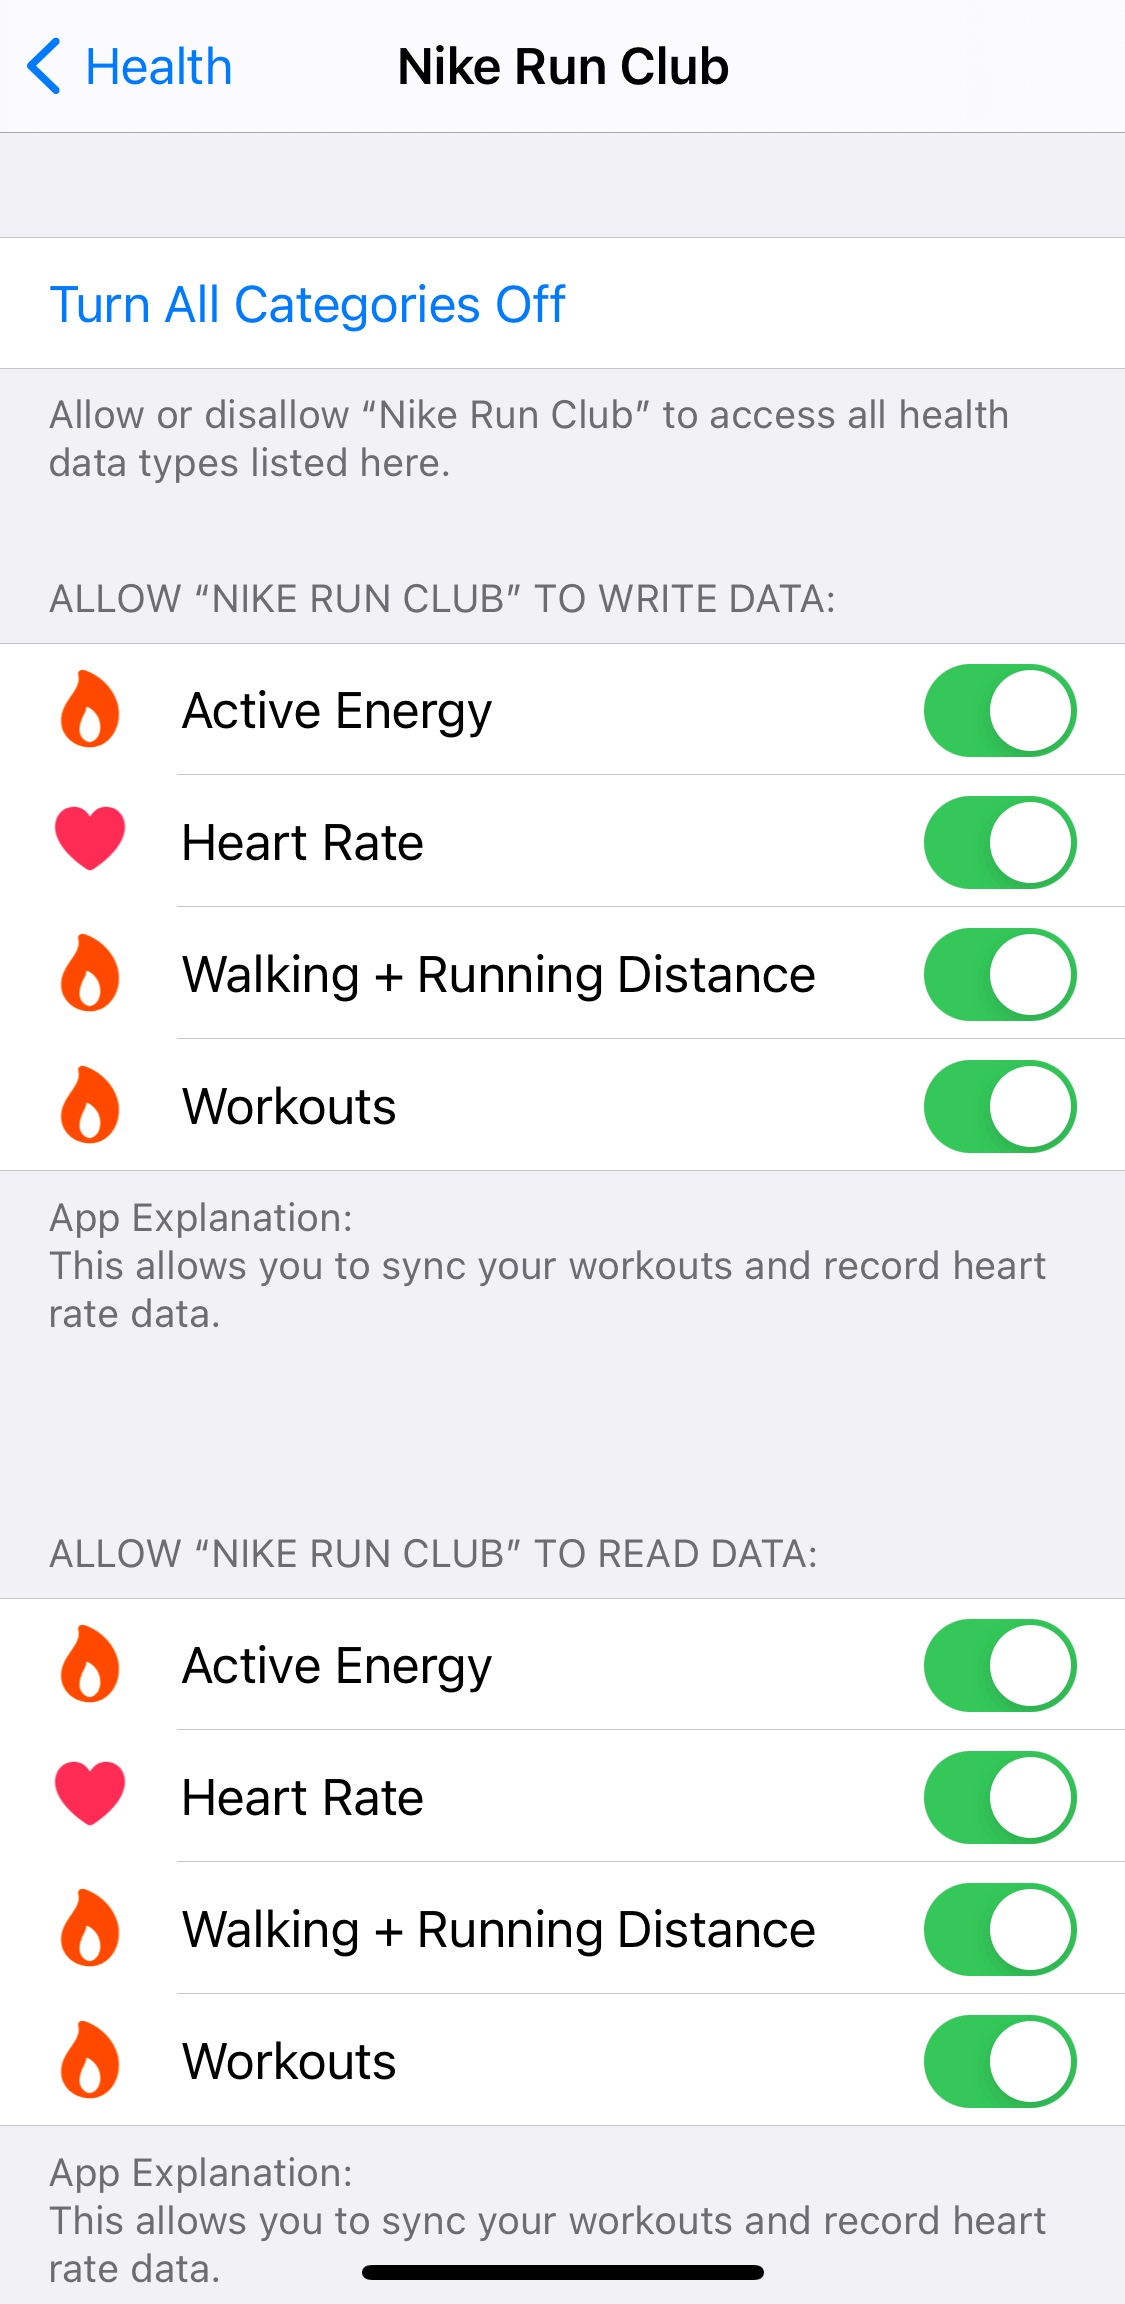 Heart rate in fitness and Nike - Apple Community